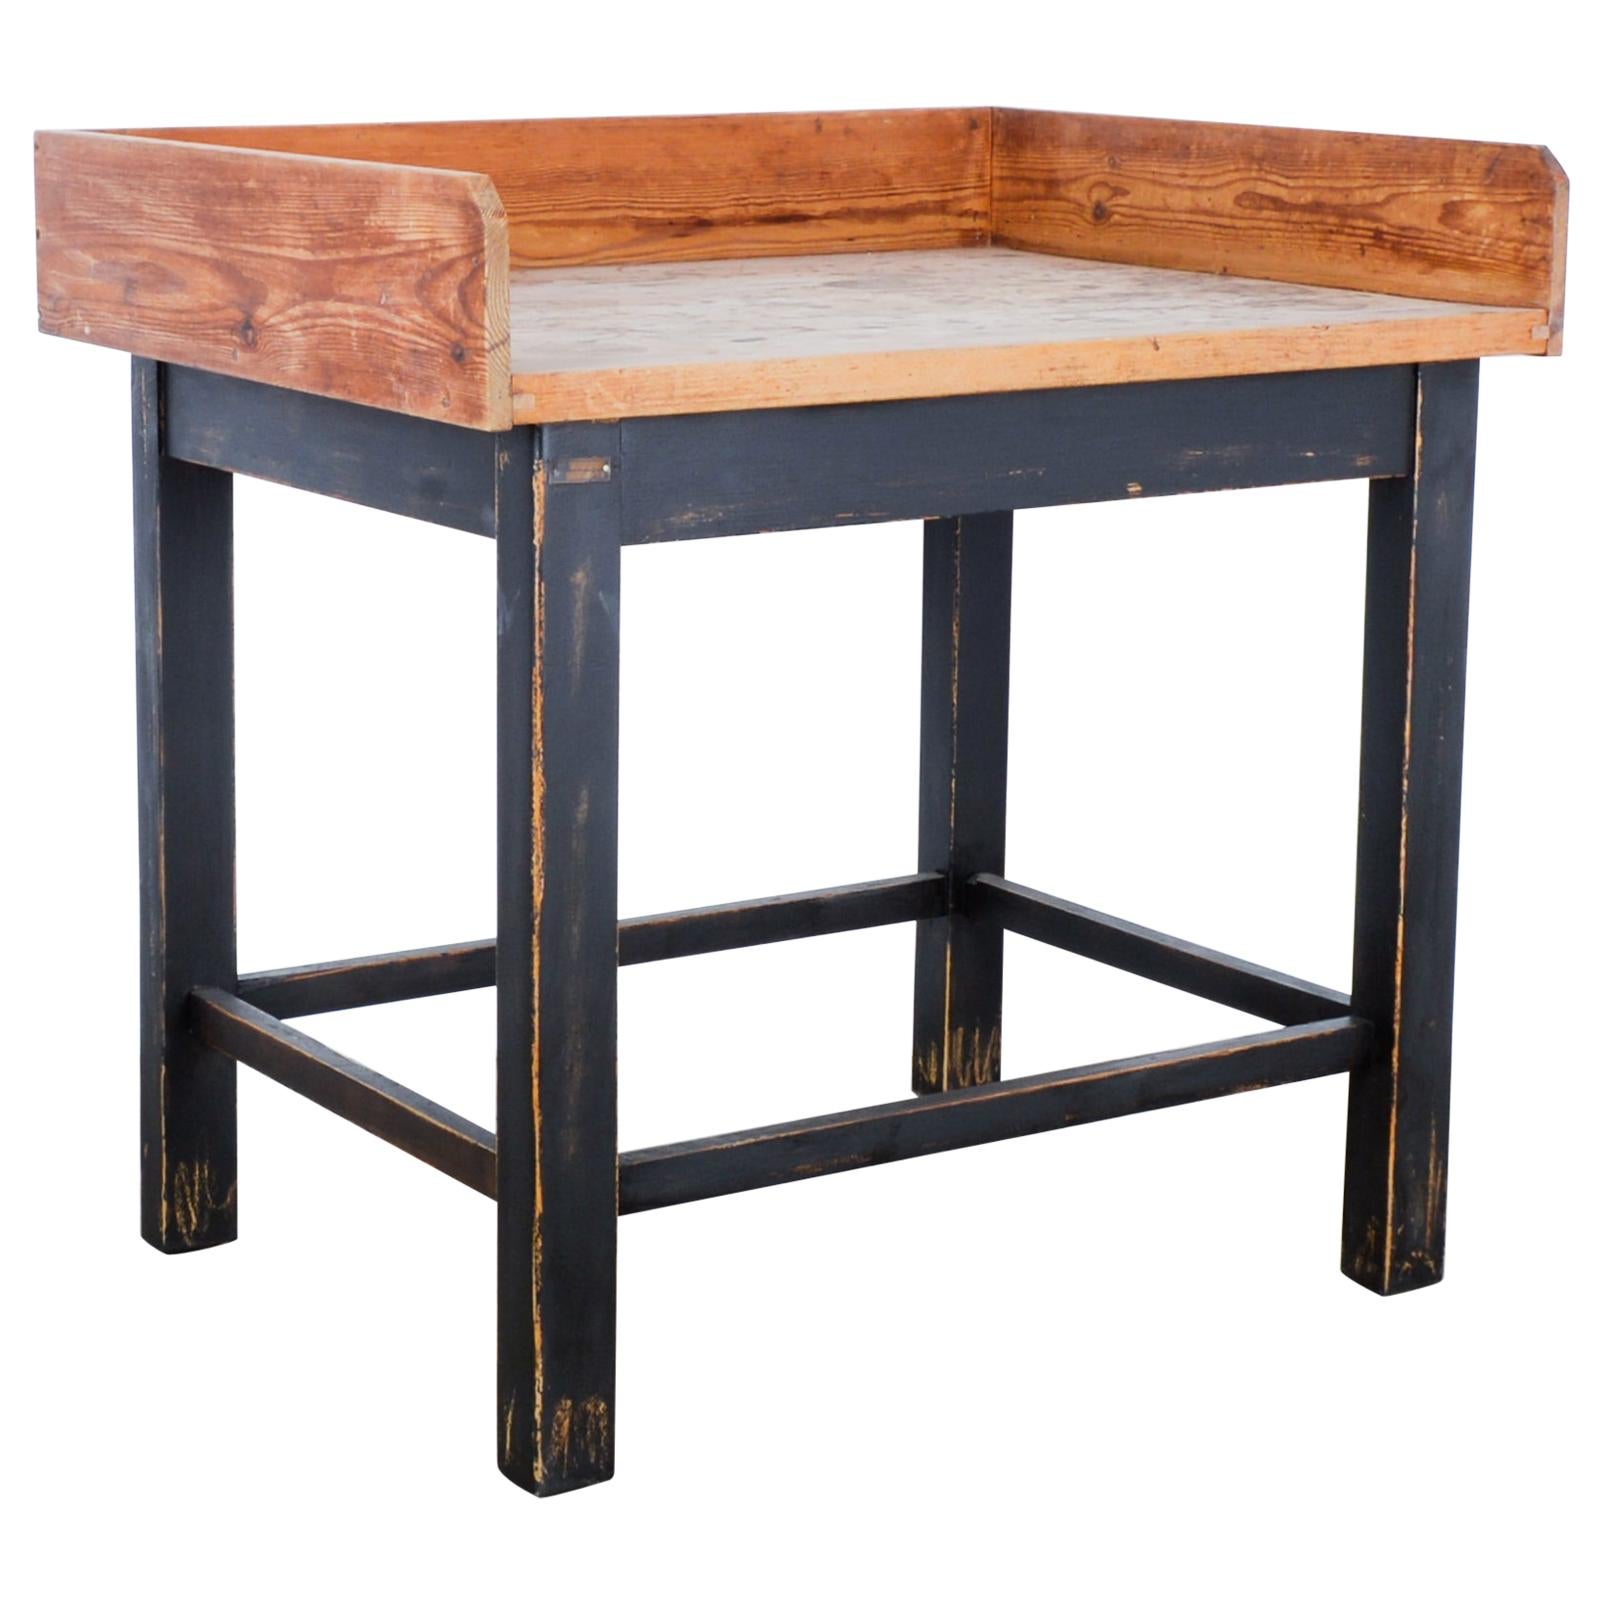 1950s Central European Wooden Patinated Bakery Table